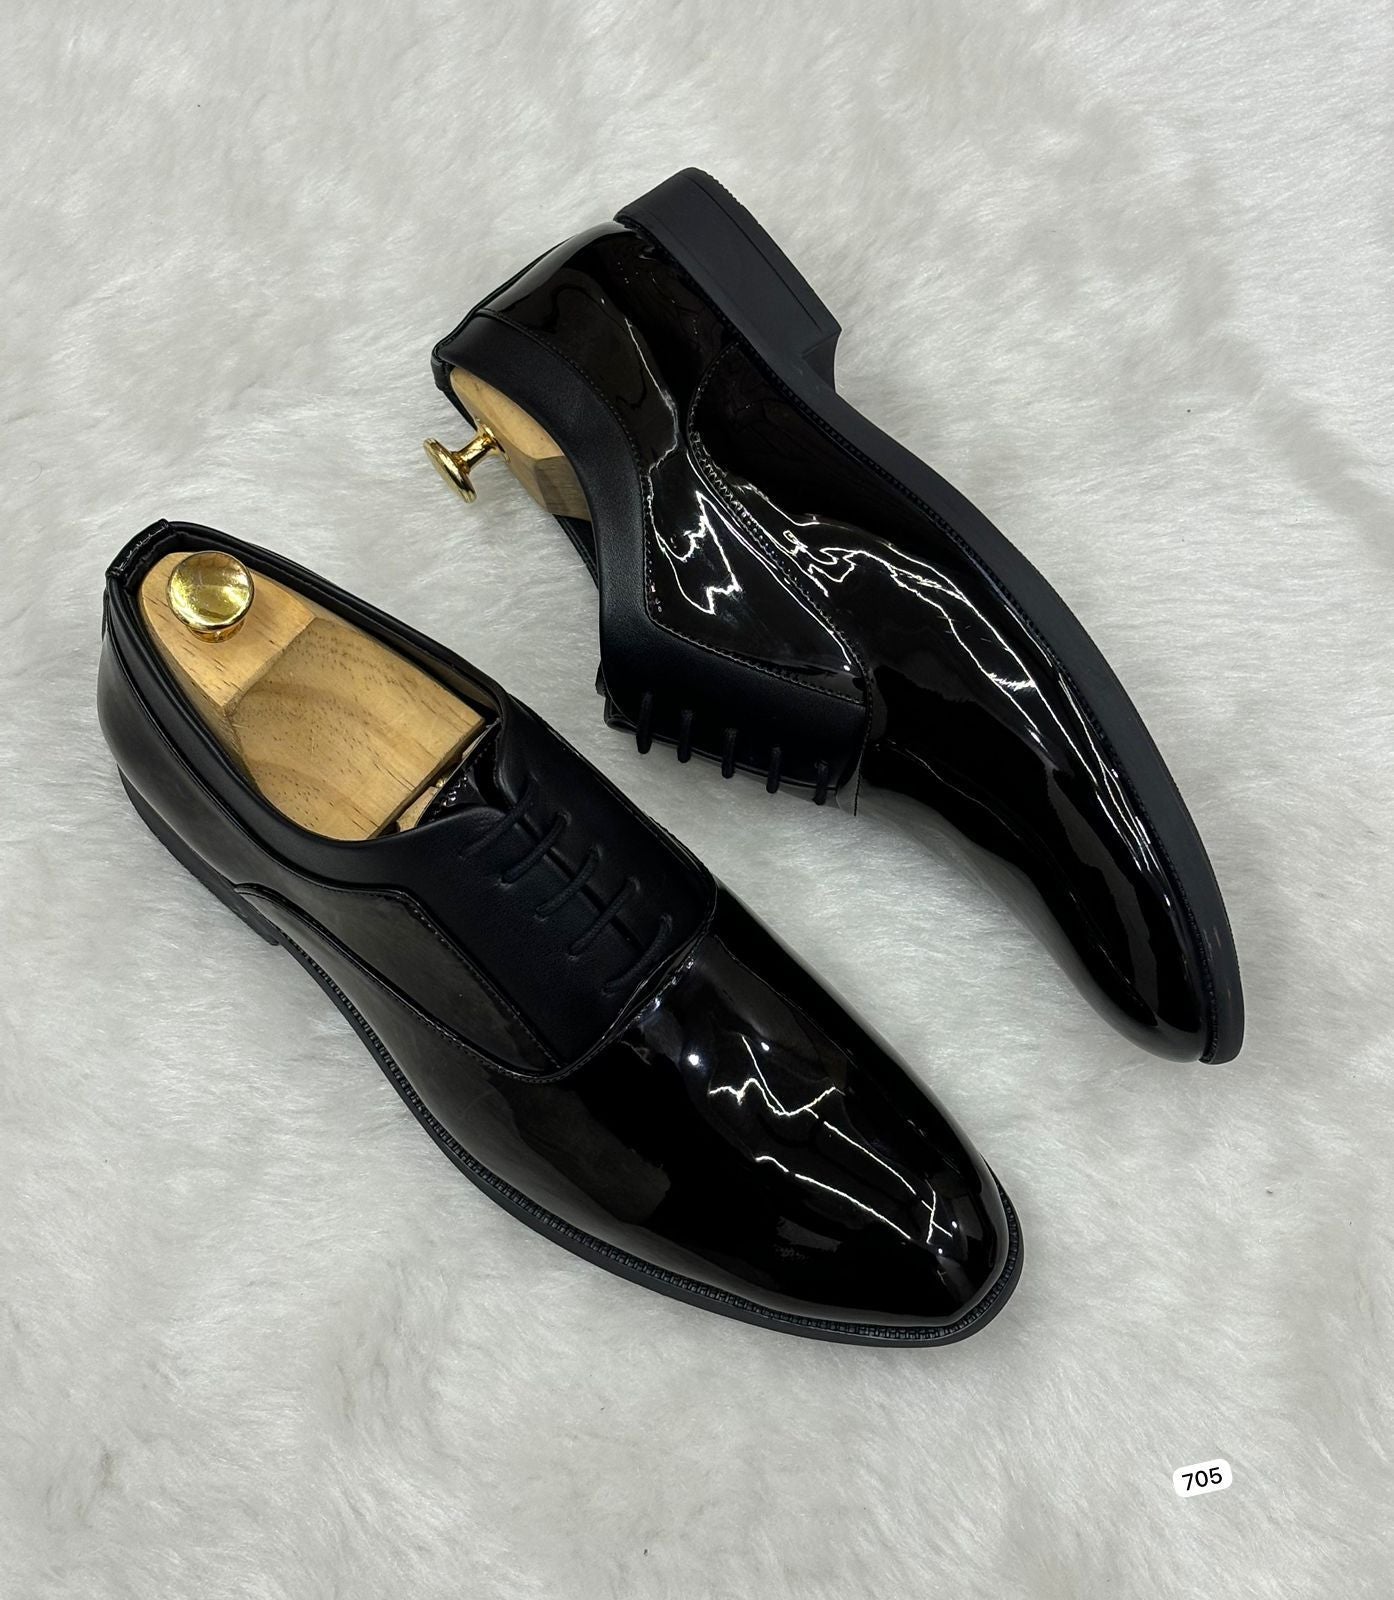 Jack Marc Shiny Oxford Lace-up Shoes Formal Style from Business to Black-Tie